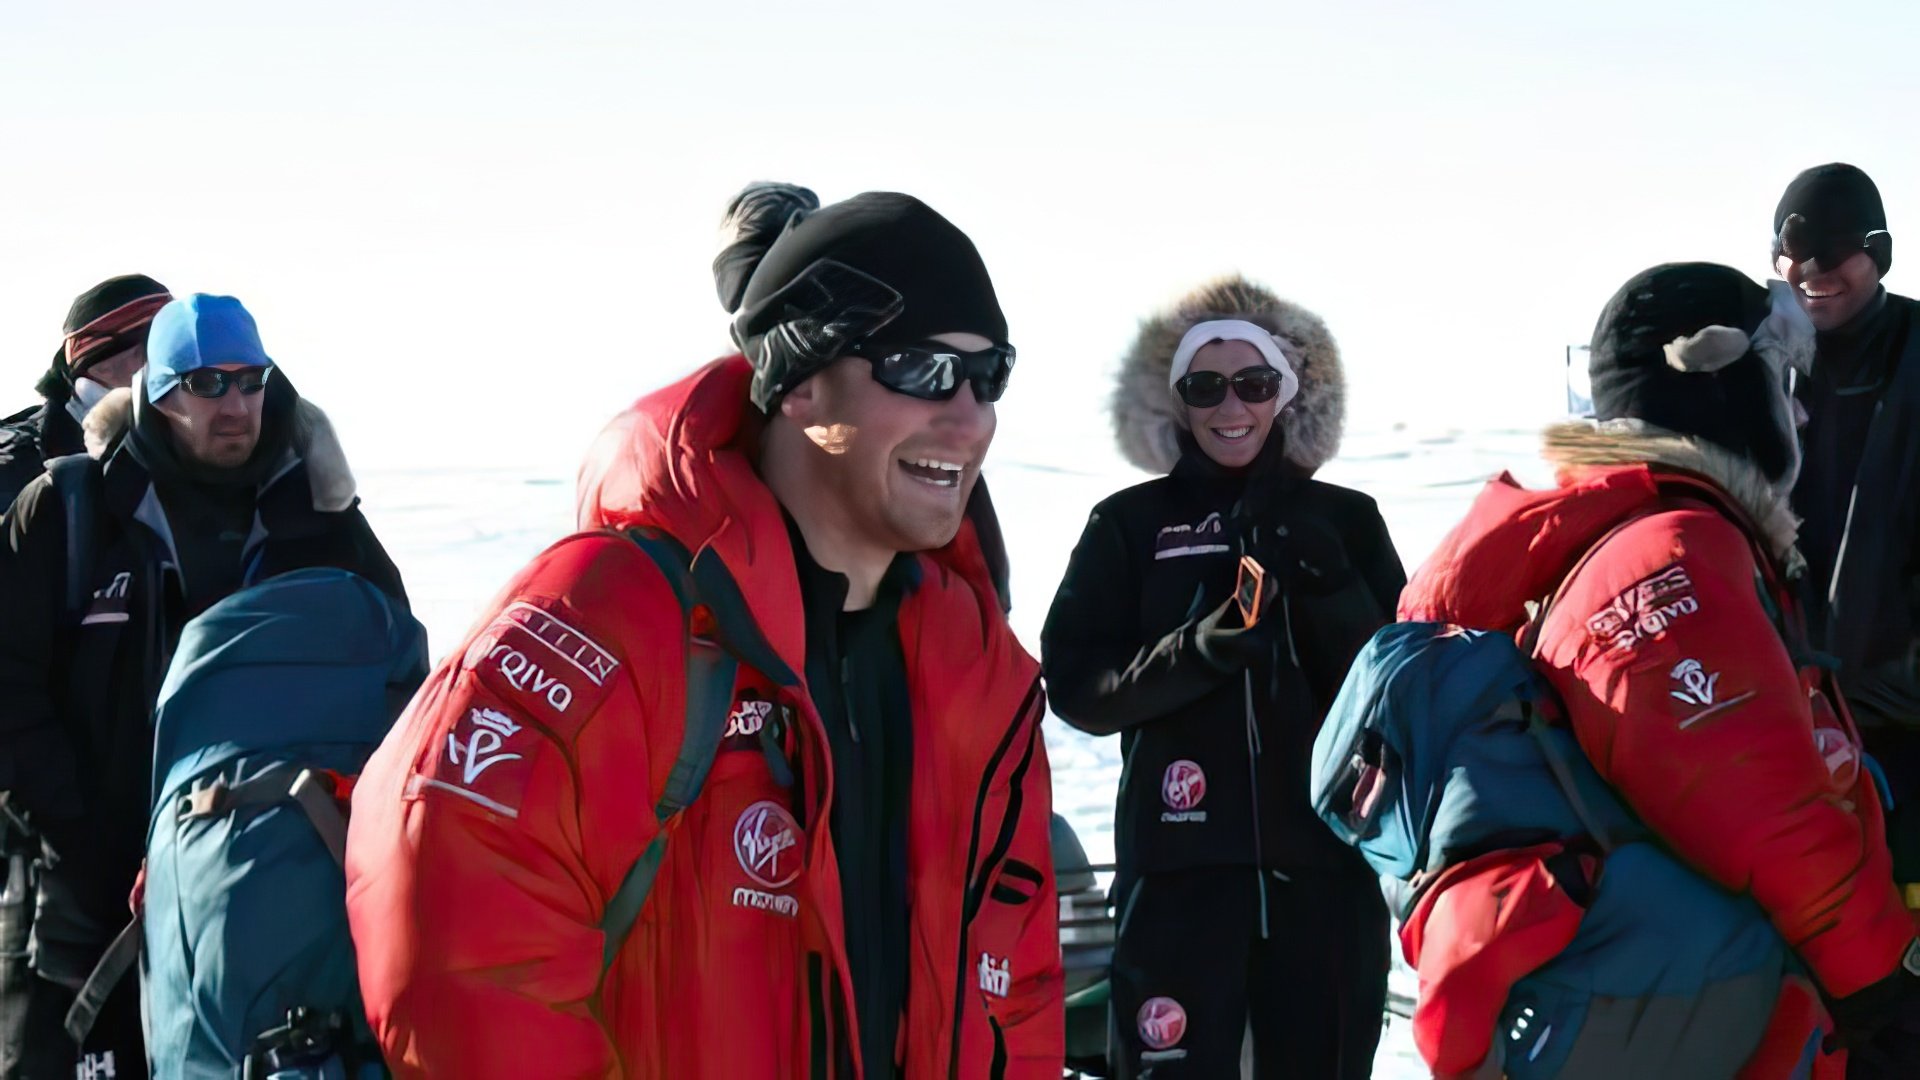 Alexander Skarsgård, Prince Harry and Dominic West visited the South Pole